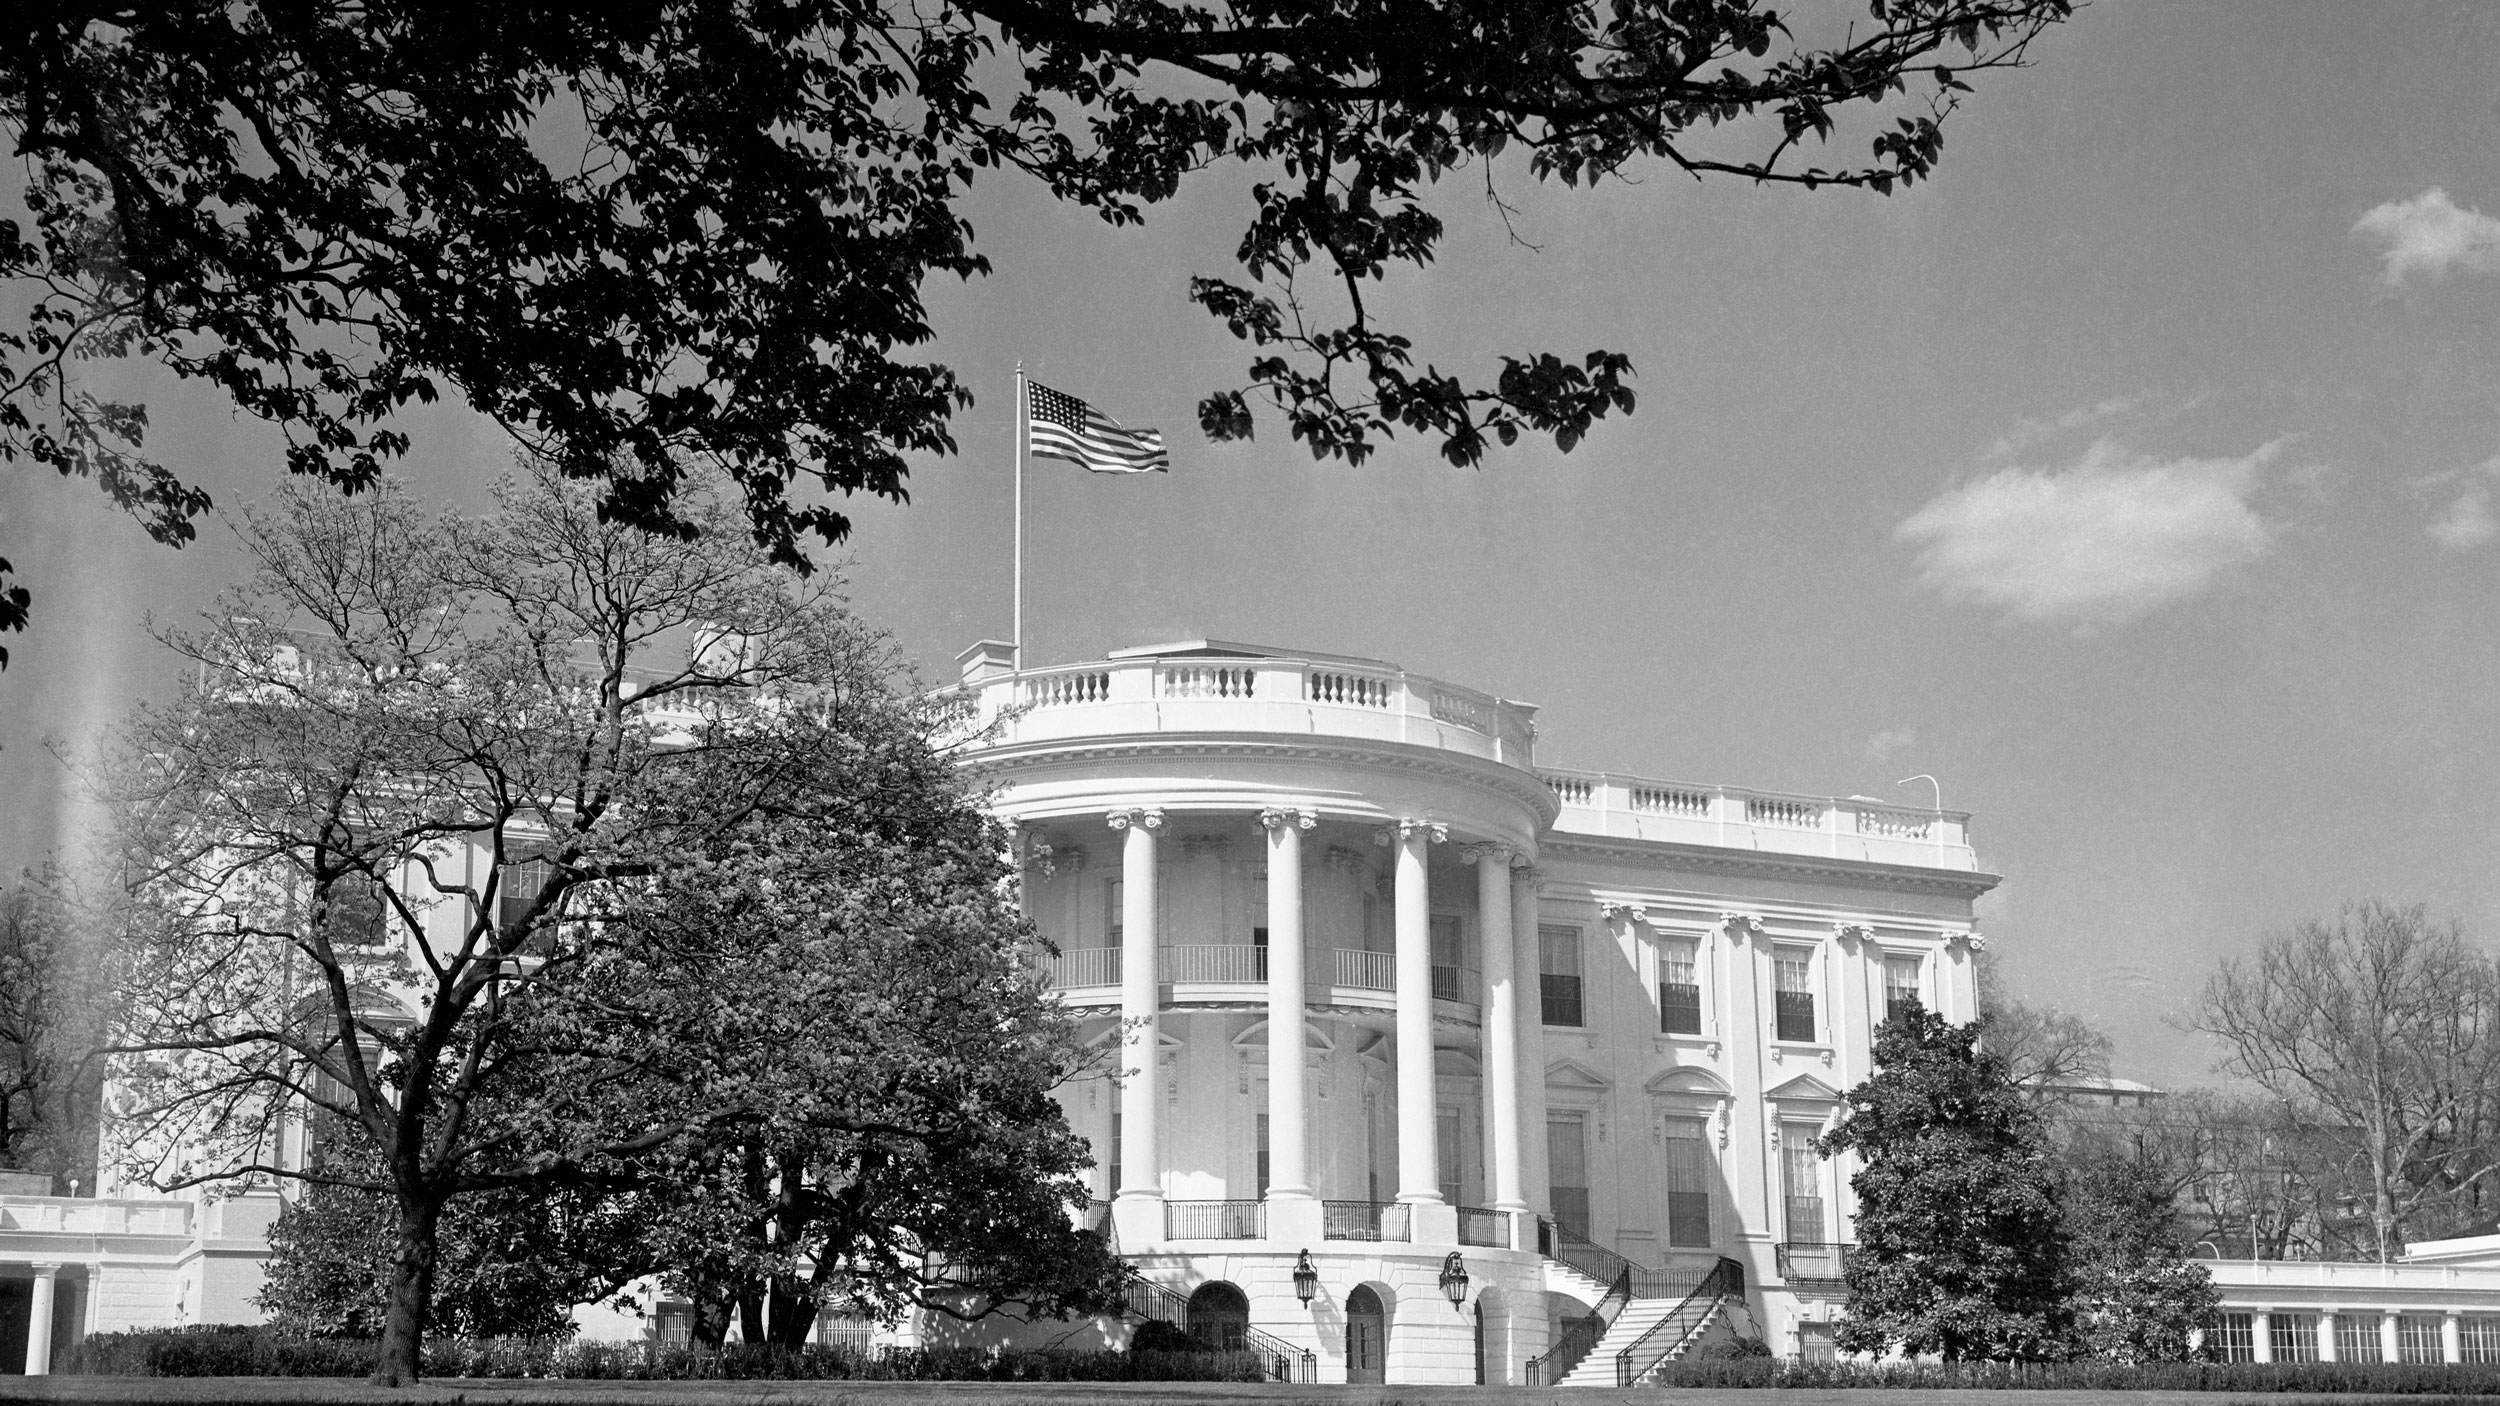 Read: When UFOs Buzzed the White House